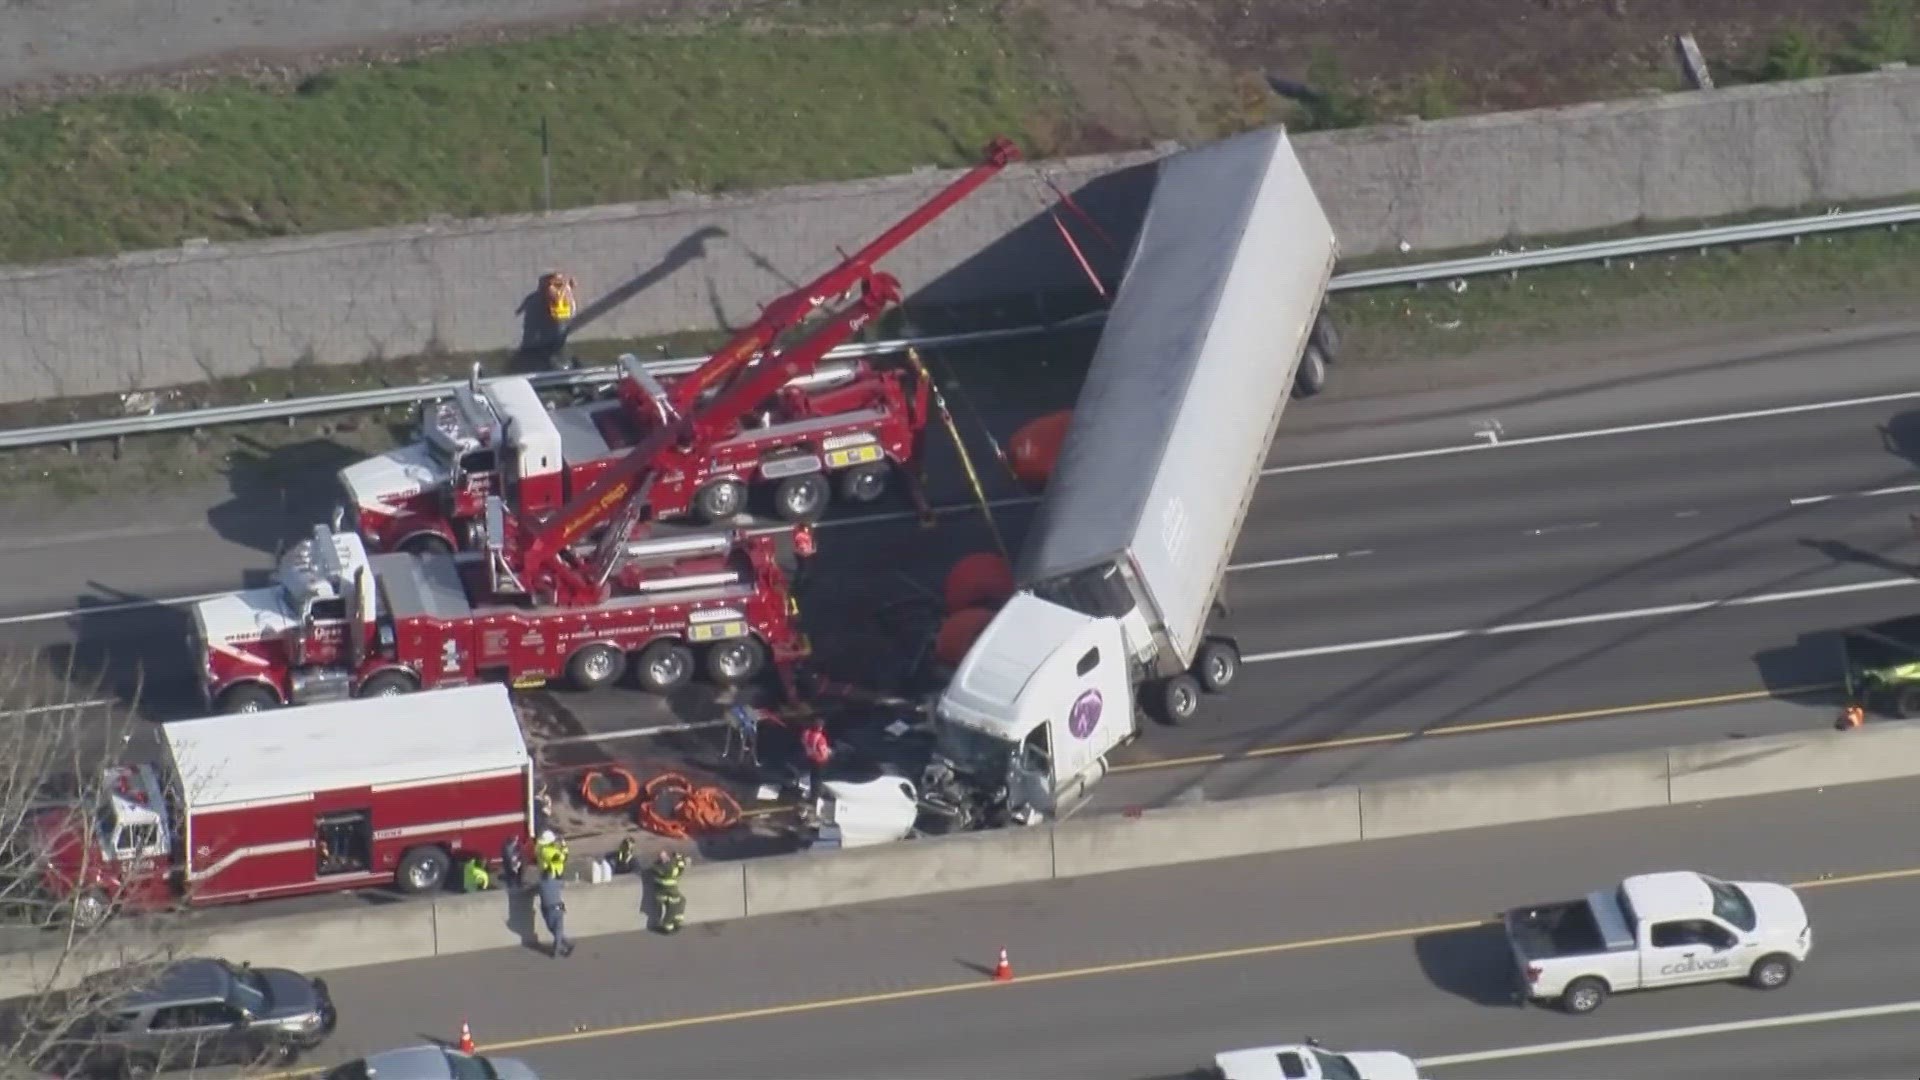 All northbound lanes were blocked for hours on Friday as crews cleared the scene.